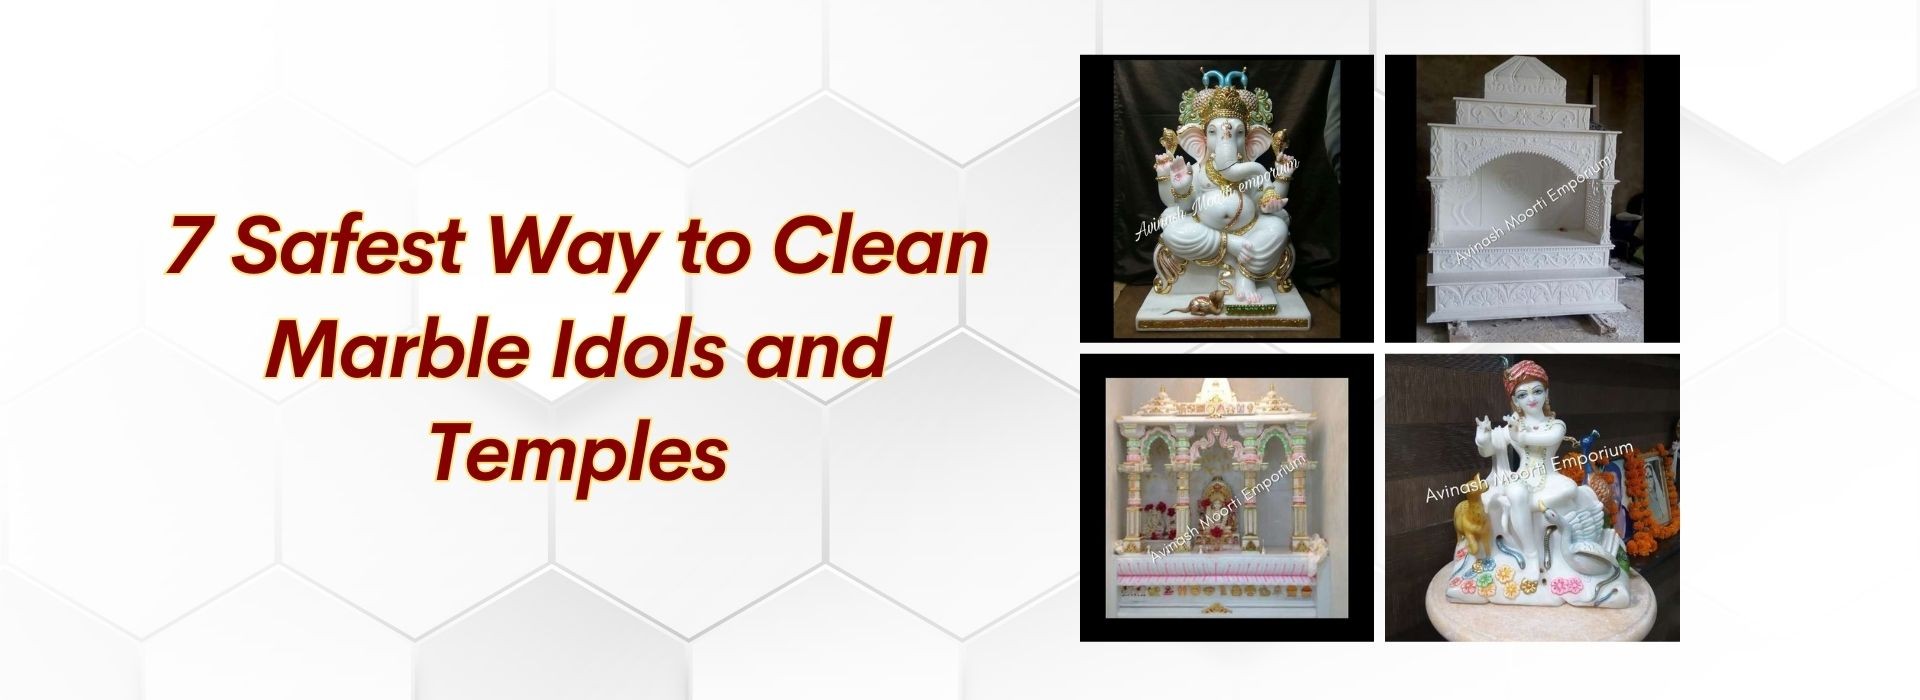 7 Safest Way to Clean Marble Idols and Temples